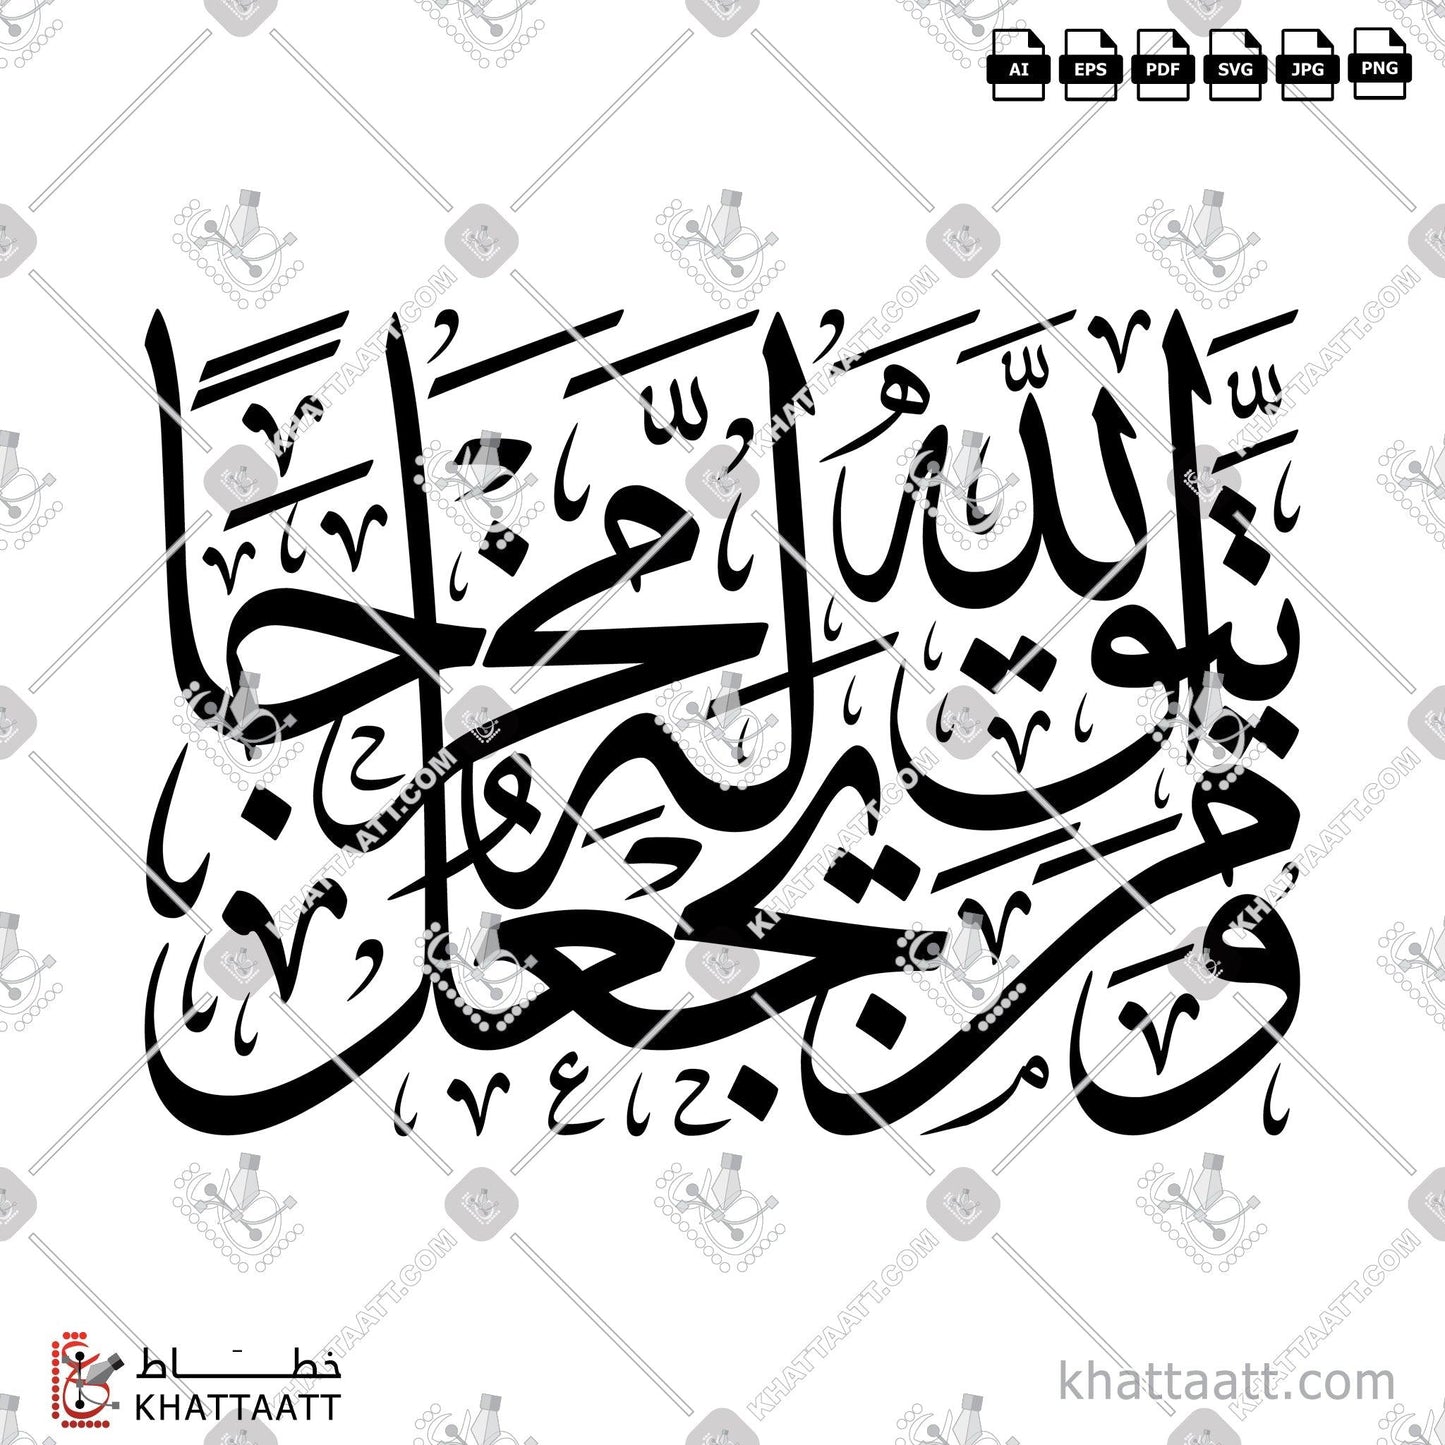 Download Arabic Calligraphy of ومن يتق الله يجعل له مخرجا in Thuluth - خط الثلث in vector and .png